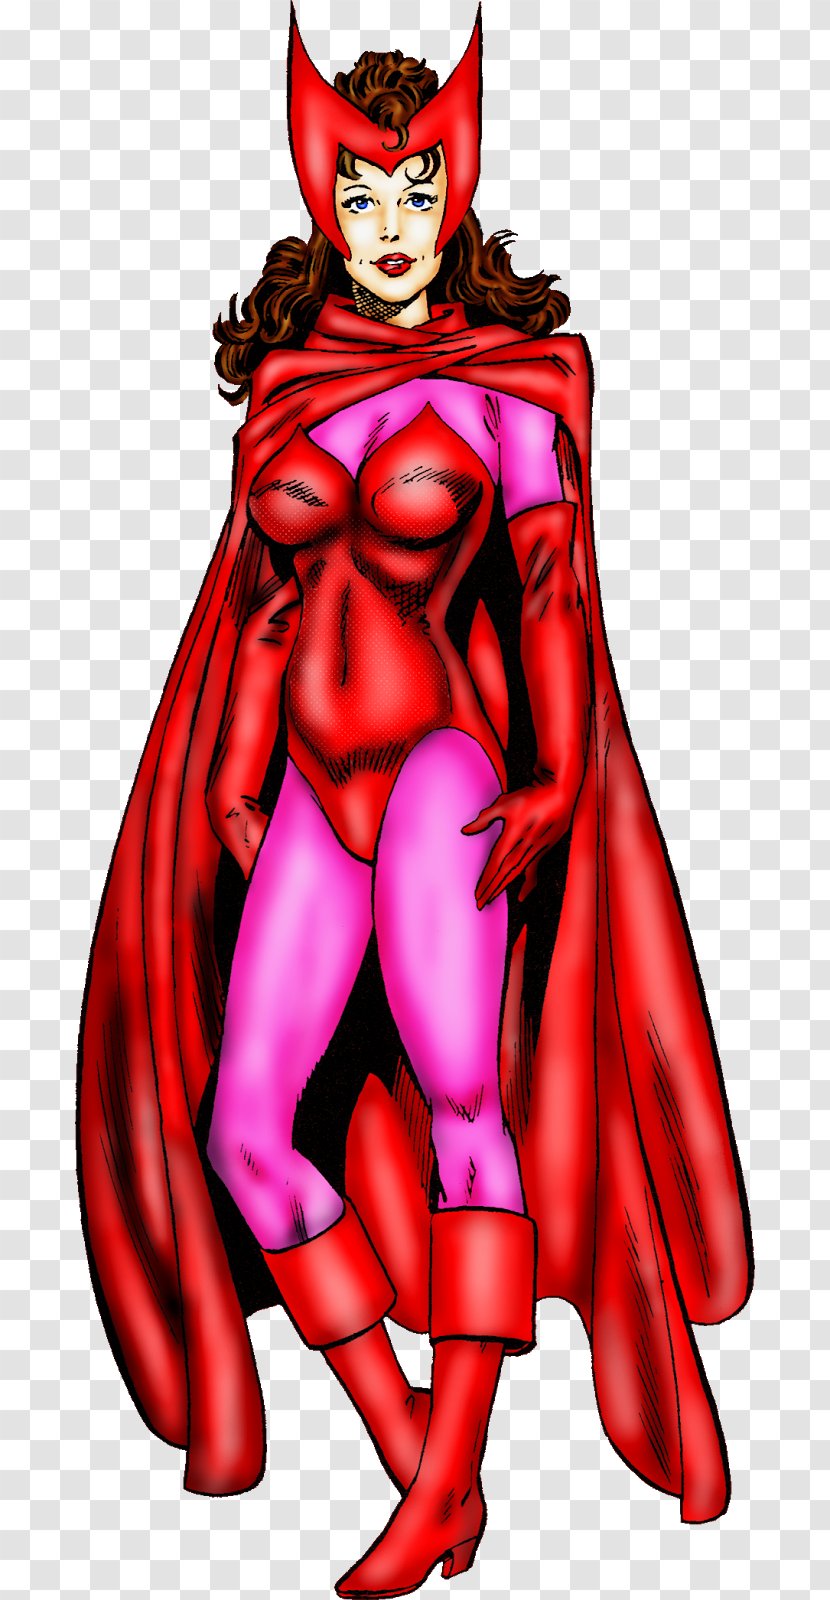 Wanda Maximoff Wasp Magneto Quicksilver Iron Man - Scarlet Witch Transparent PNG